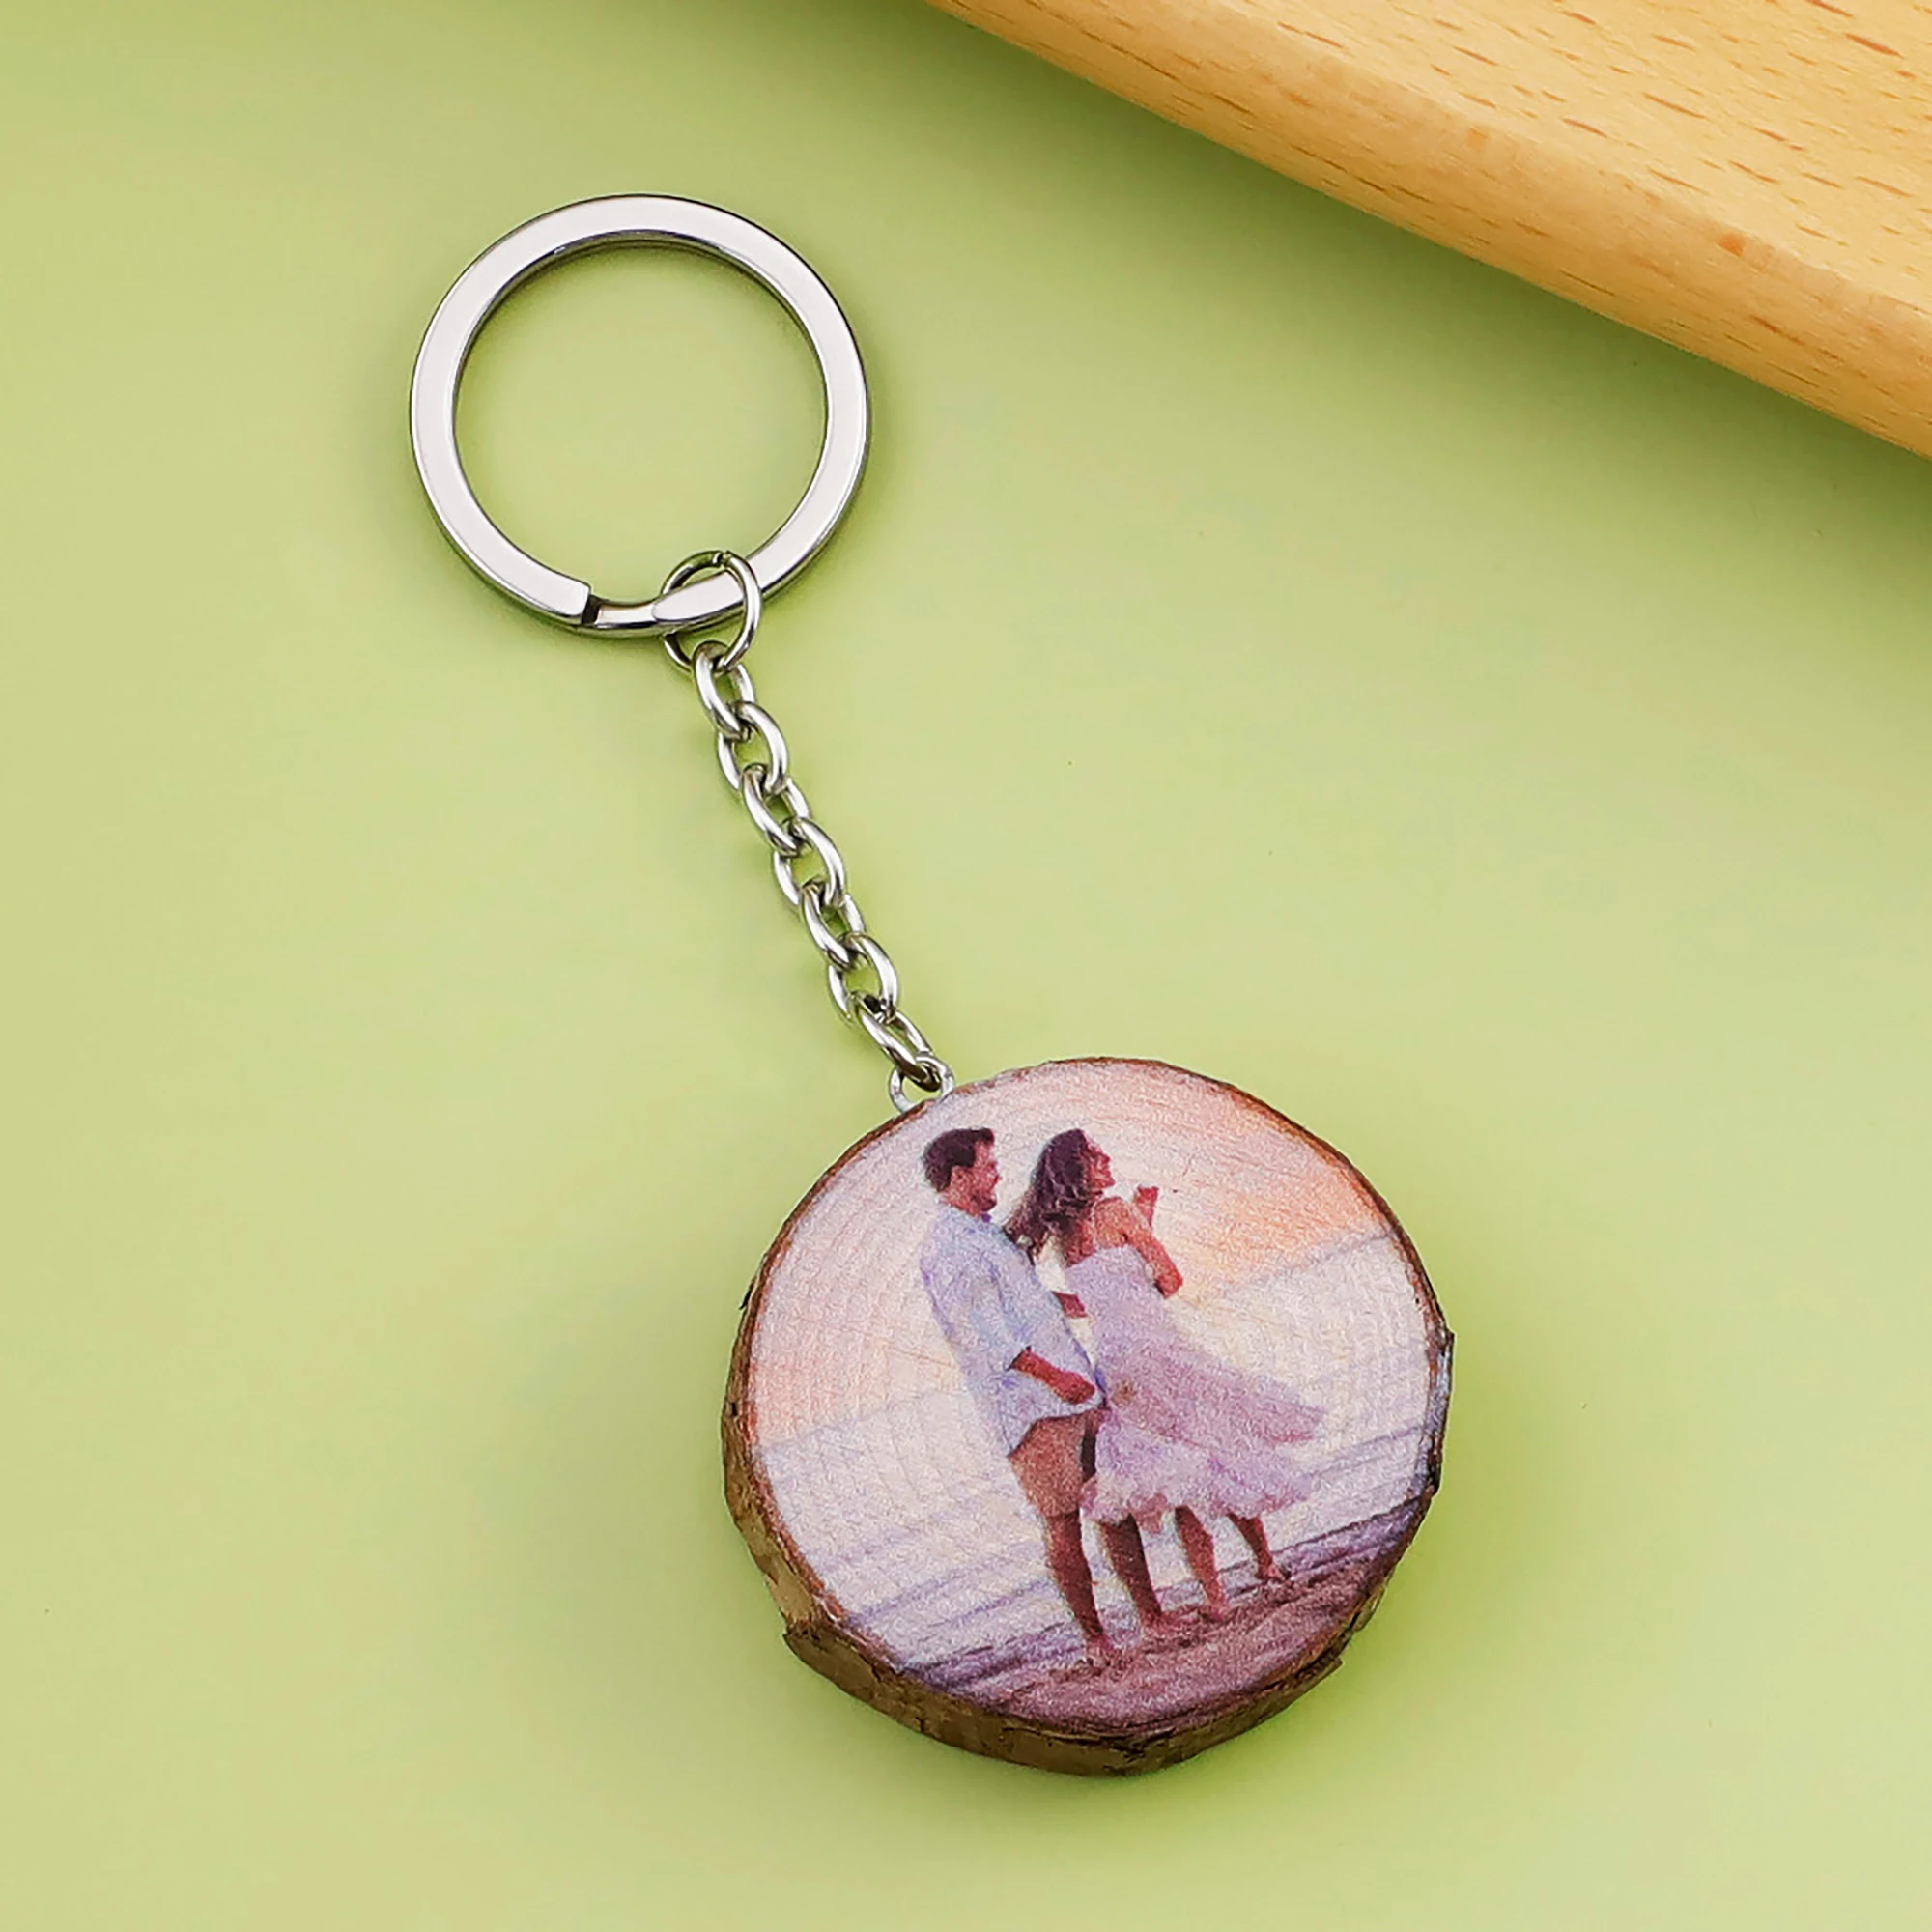 

Personalized Engraved Wooden Keychain With Photo Printing Keyring Custom Vintage Keychains Gifts For Men Women Memorial Present